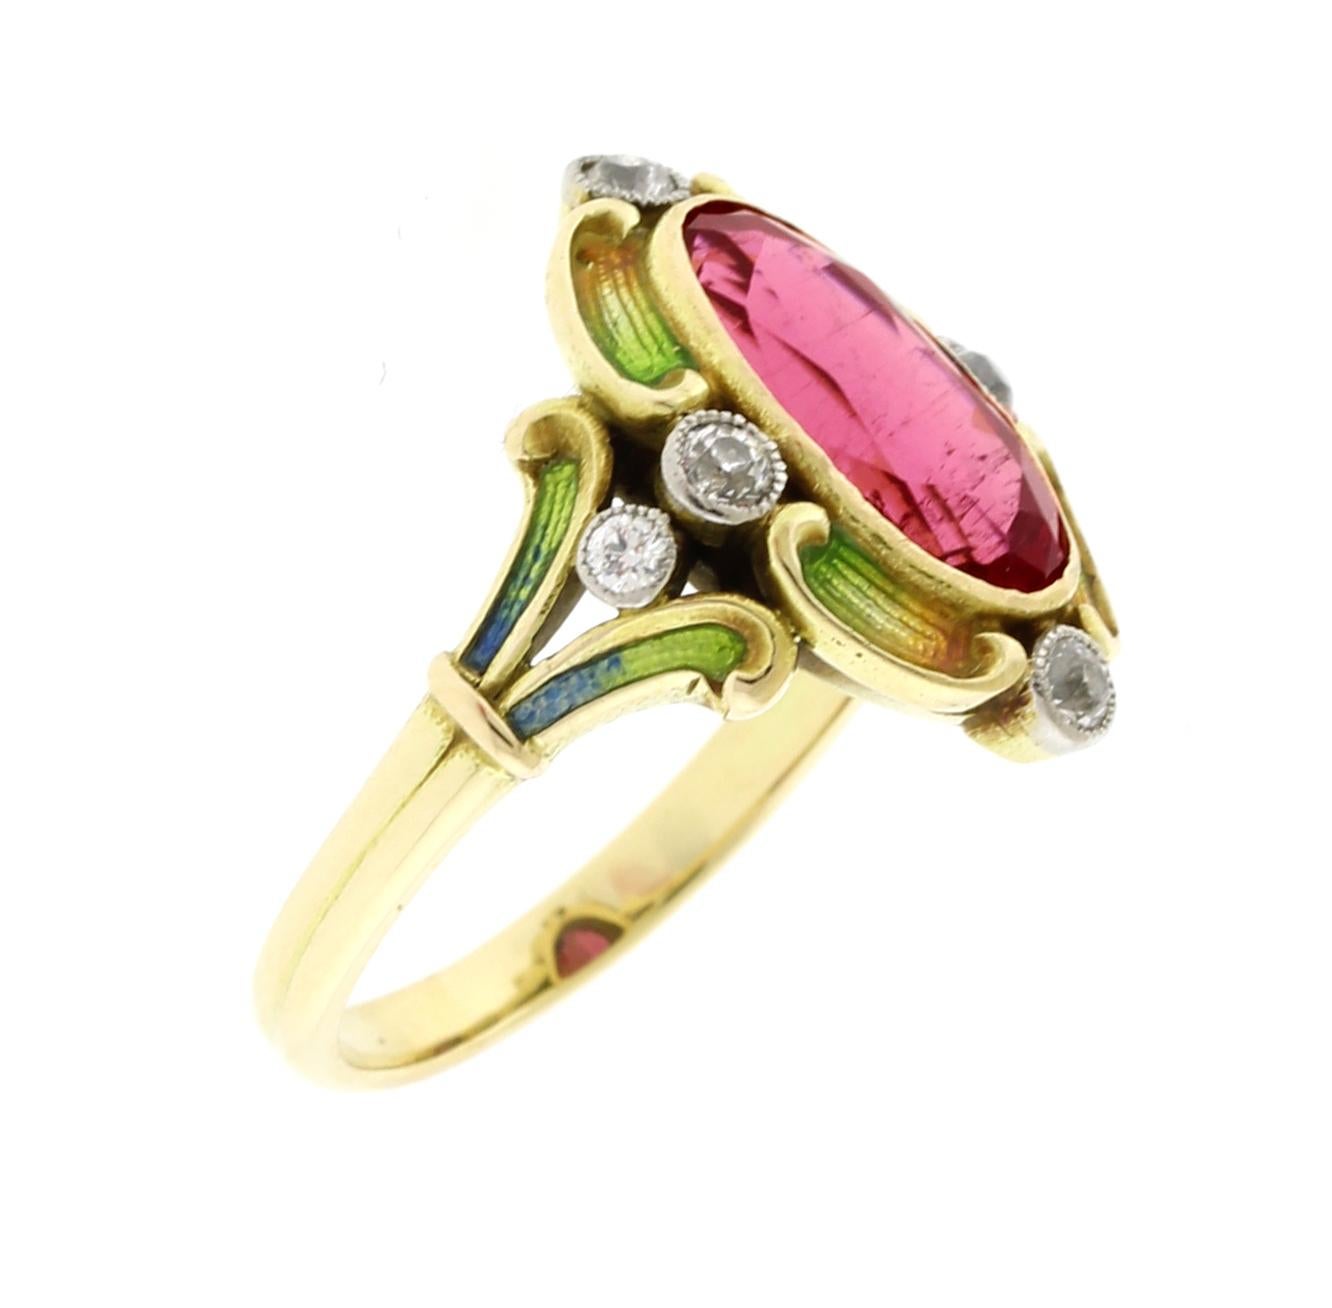 Oval Cut Art Nouveau Ring with a Pink Tourmaline, Diamonds and Enamel